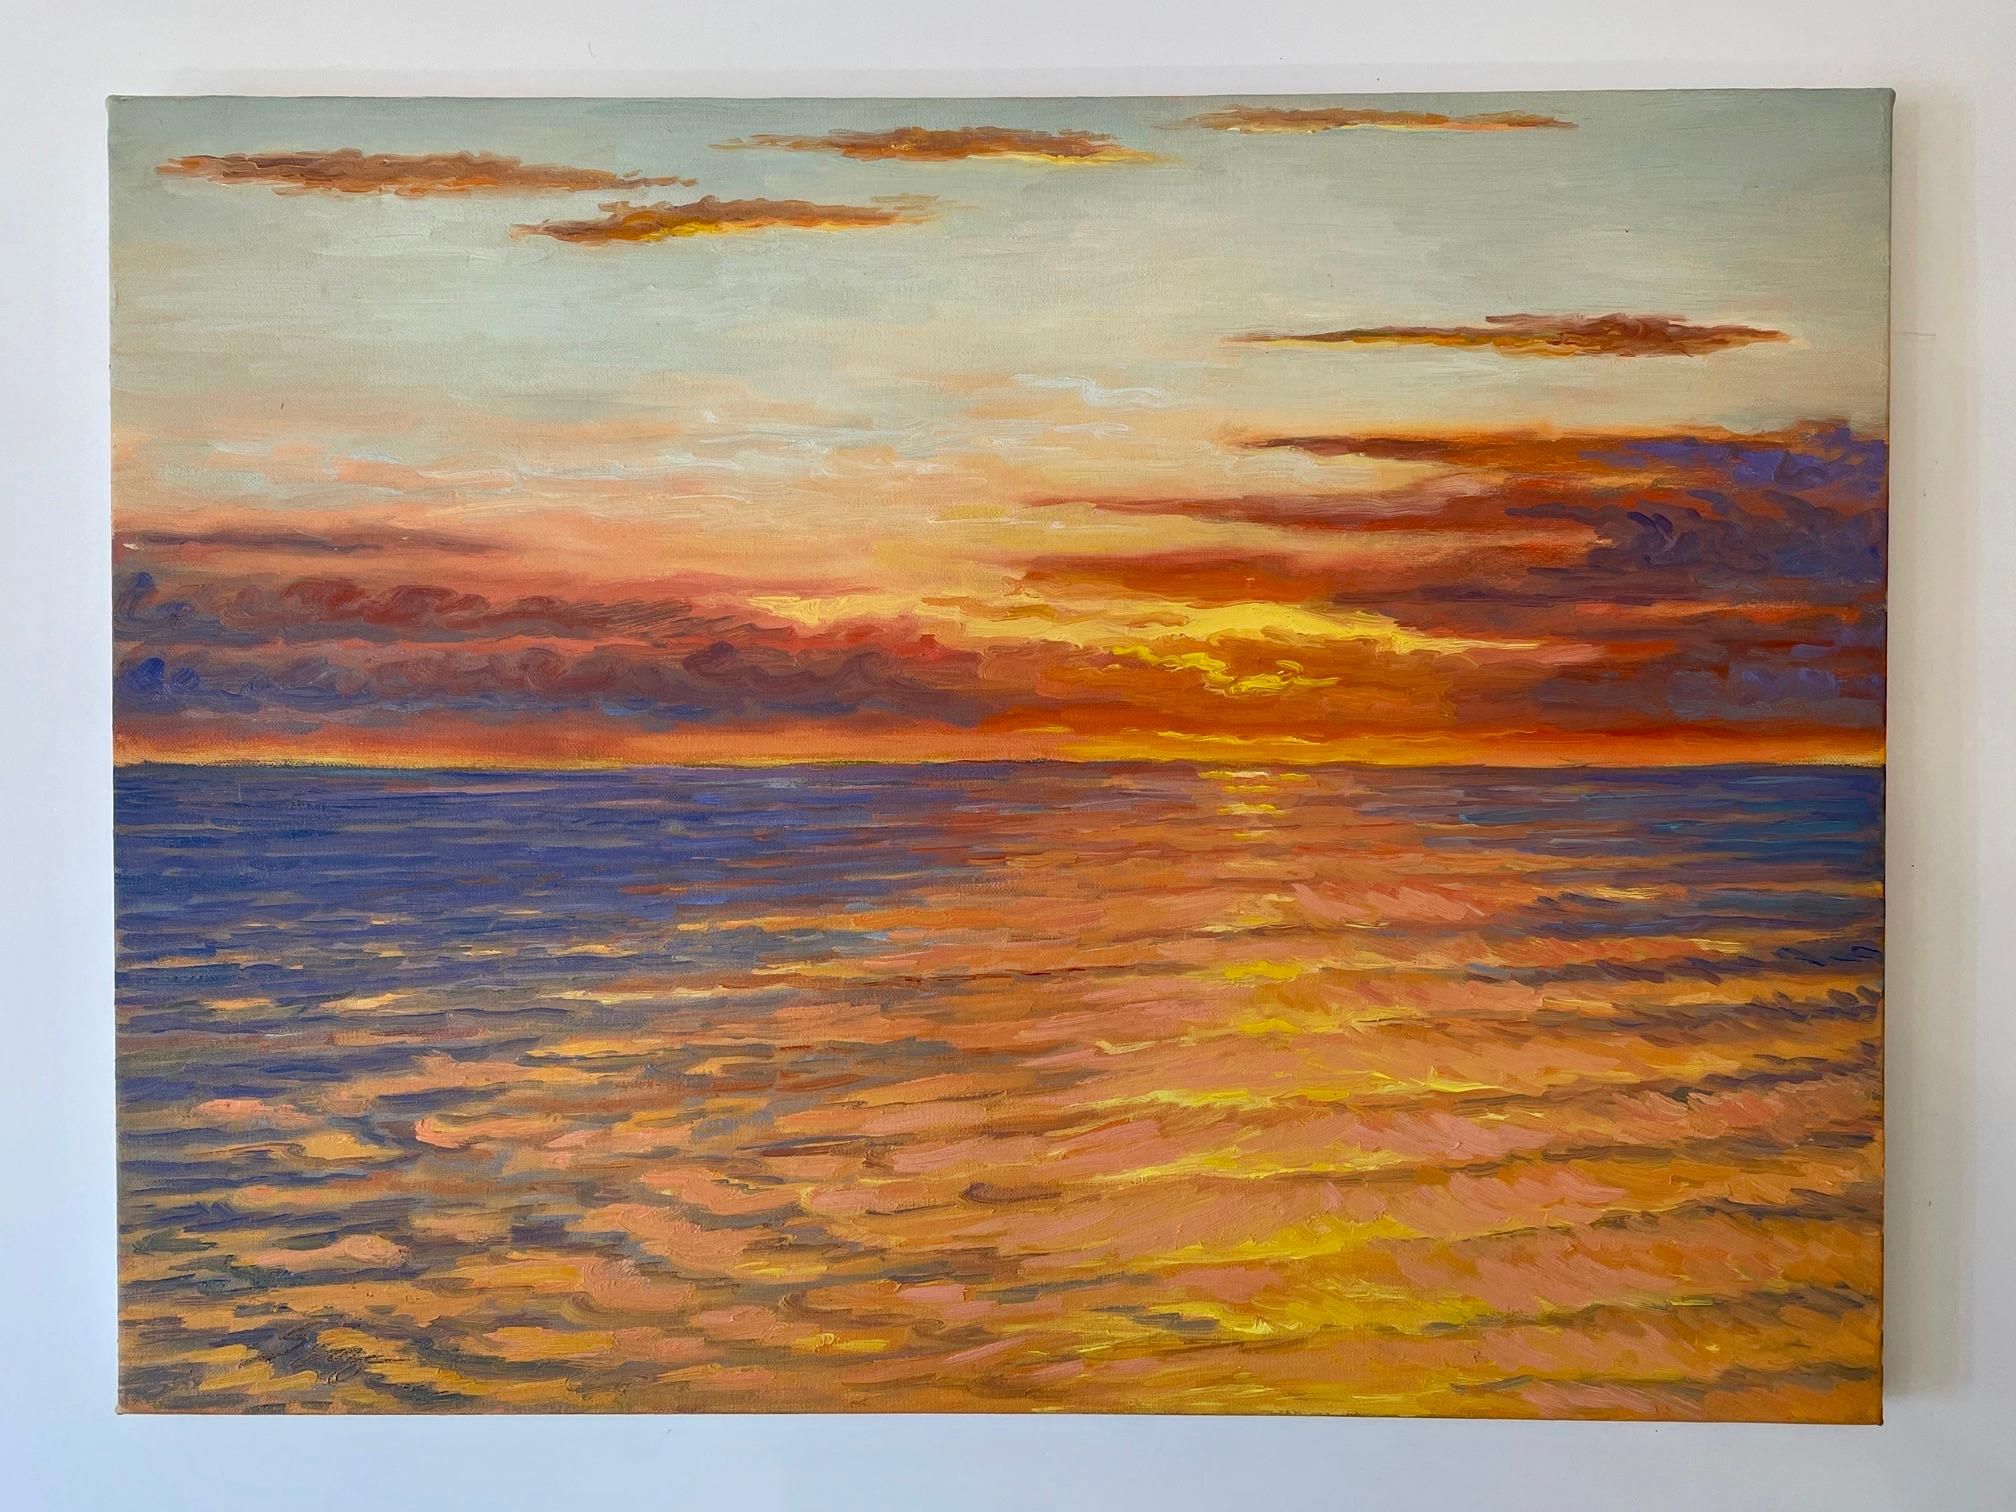 Impressionistic Sunset -- Sun setting off Long Island's East End, New York.  - American Realist Painting by Carl Scorza